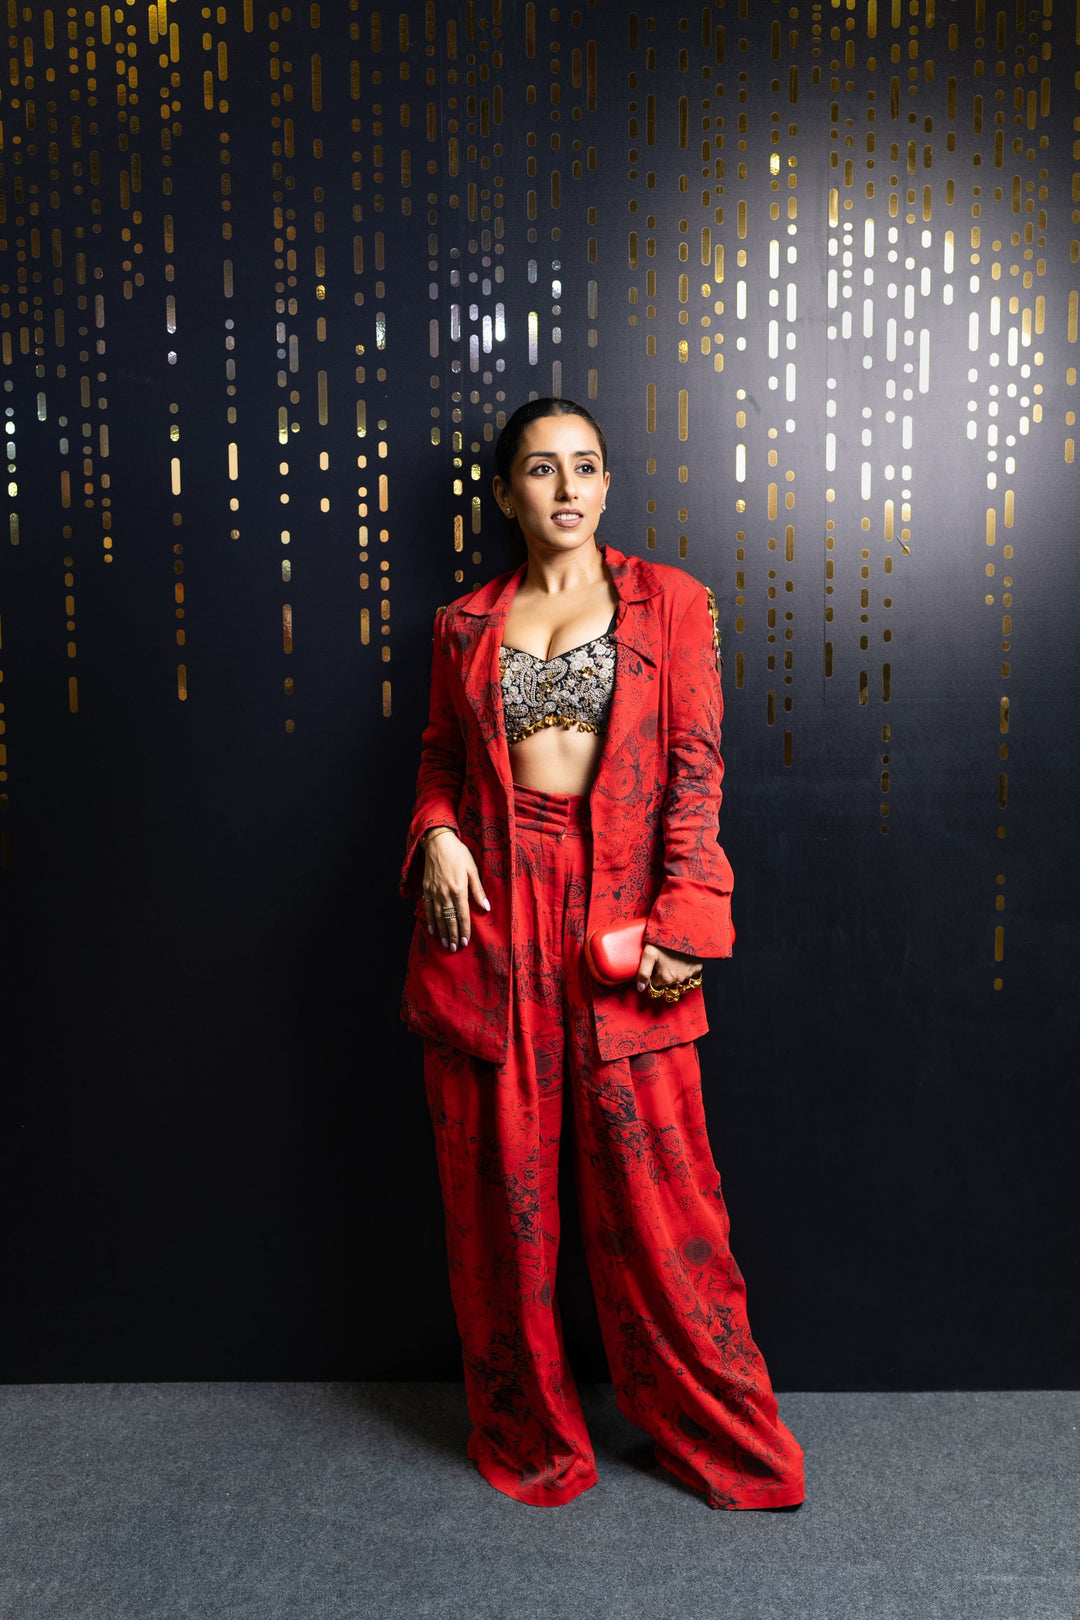 Upasana Ghai in our Red & Black Blossom Pant Set